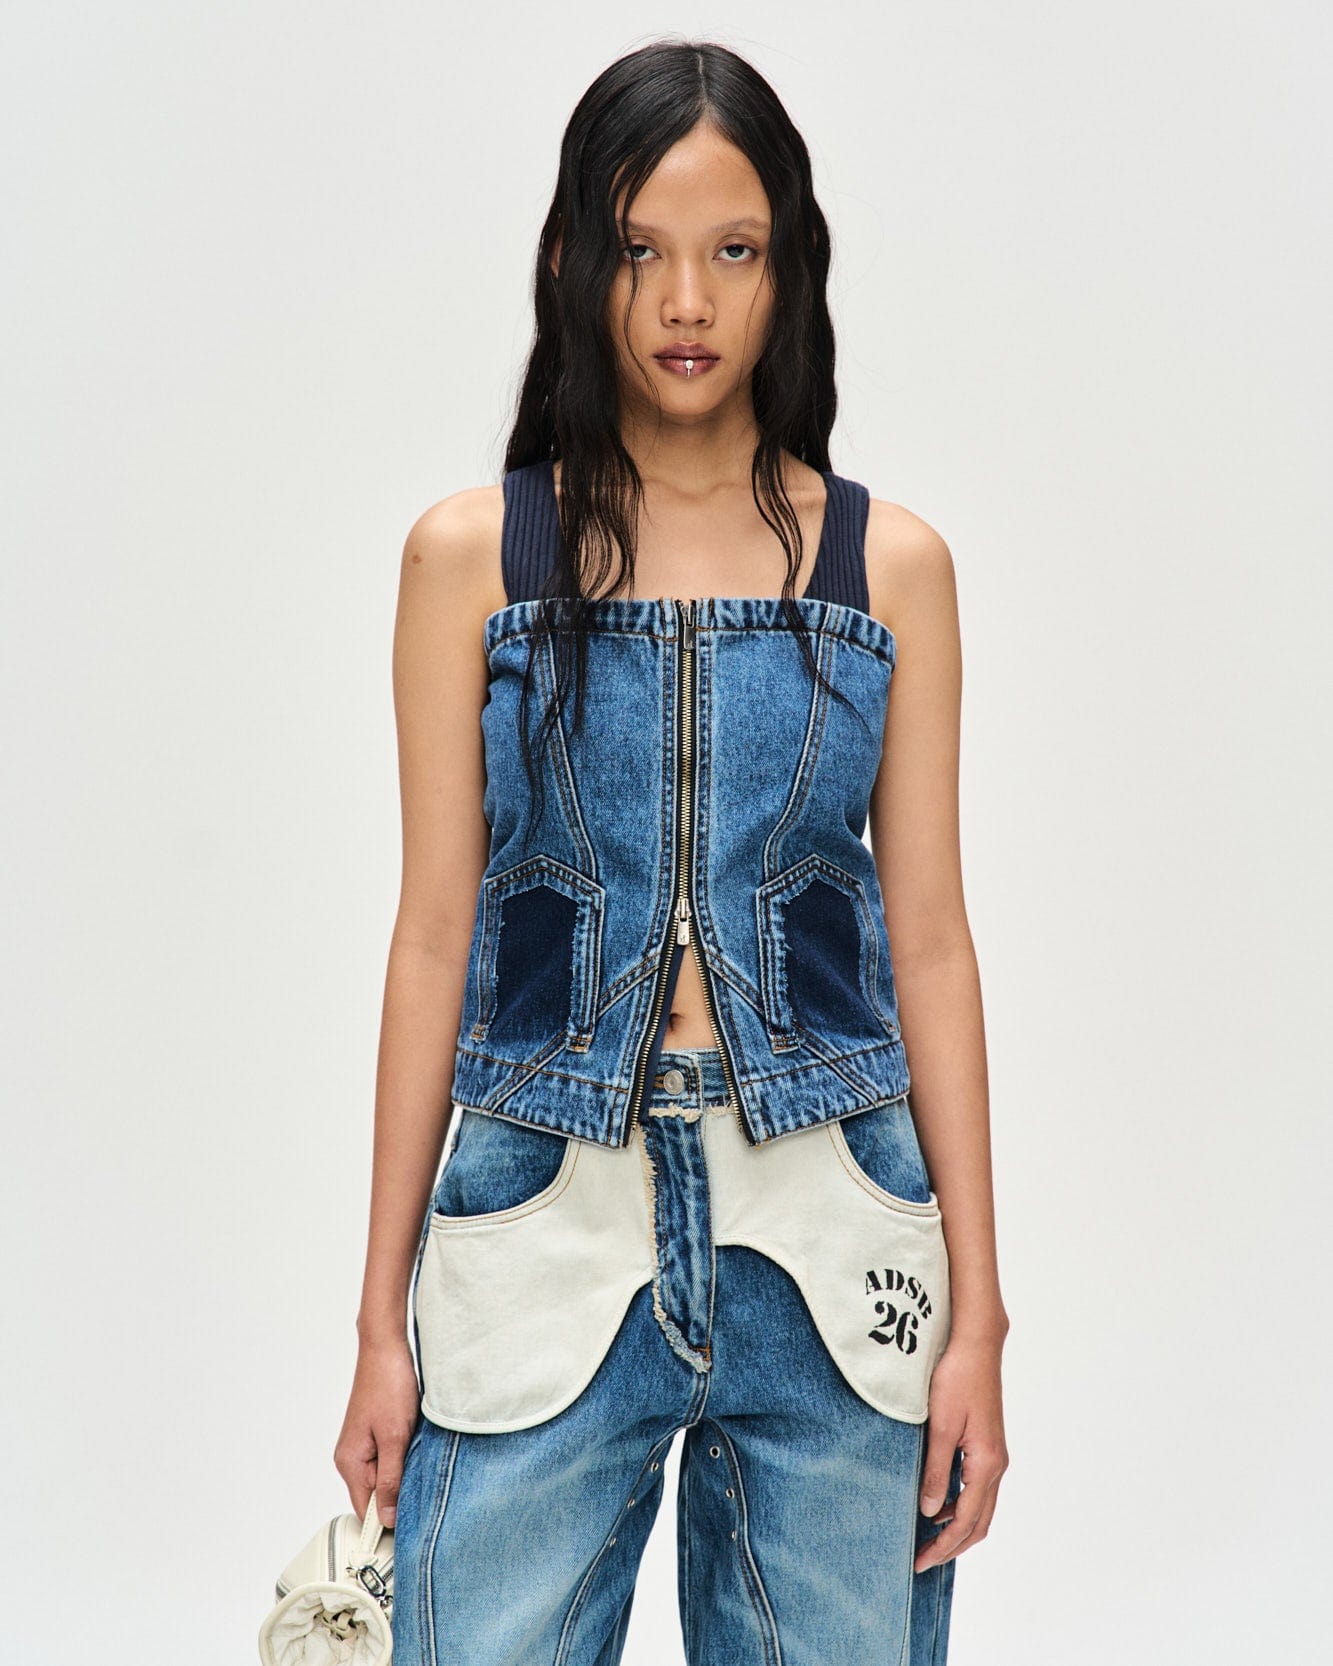 Andersson Bell (WOMEN) COVE DECONSTRUCTED DENIM BUSTIER atb1101w(BLUE)